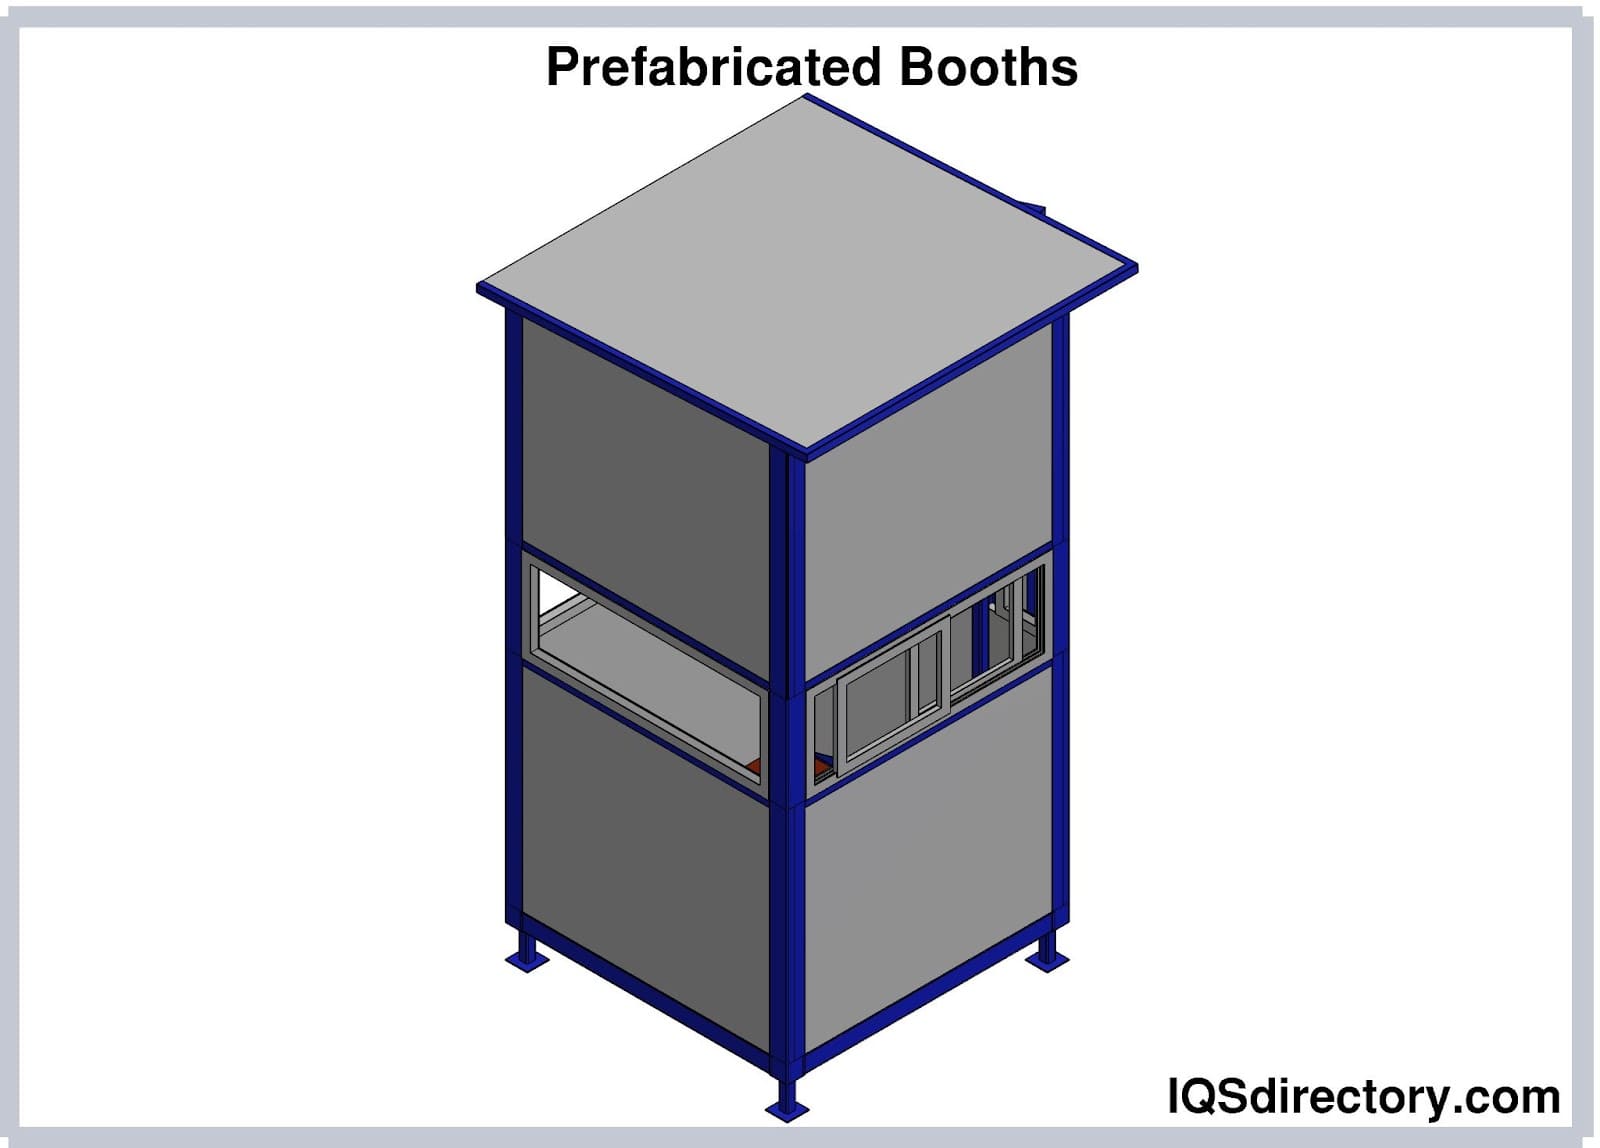 Prefabricated Booths